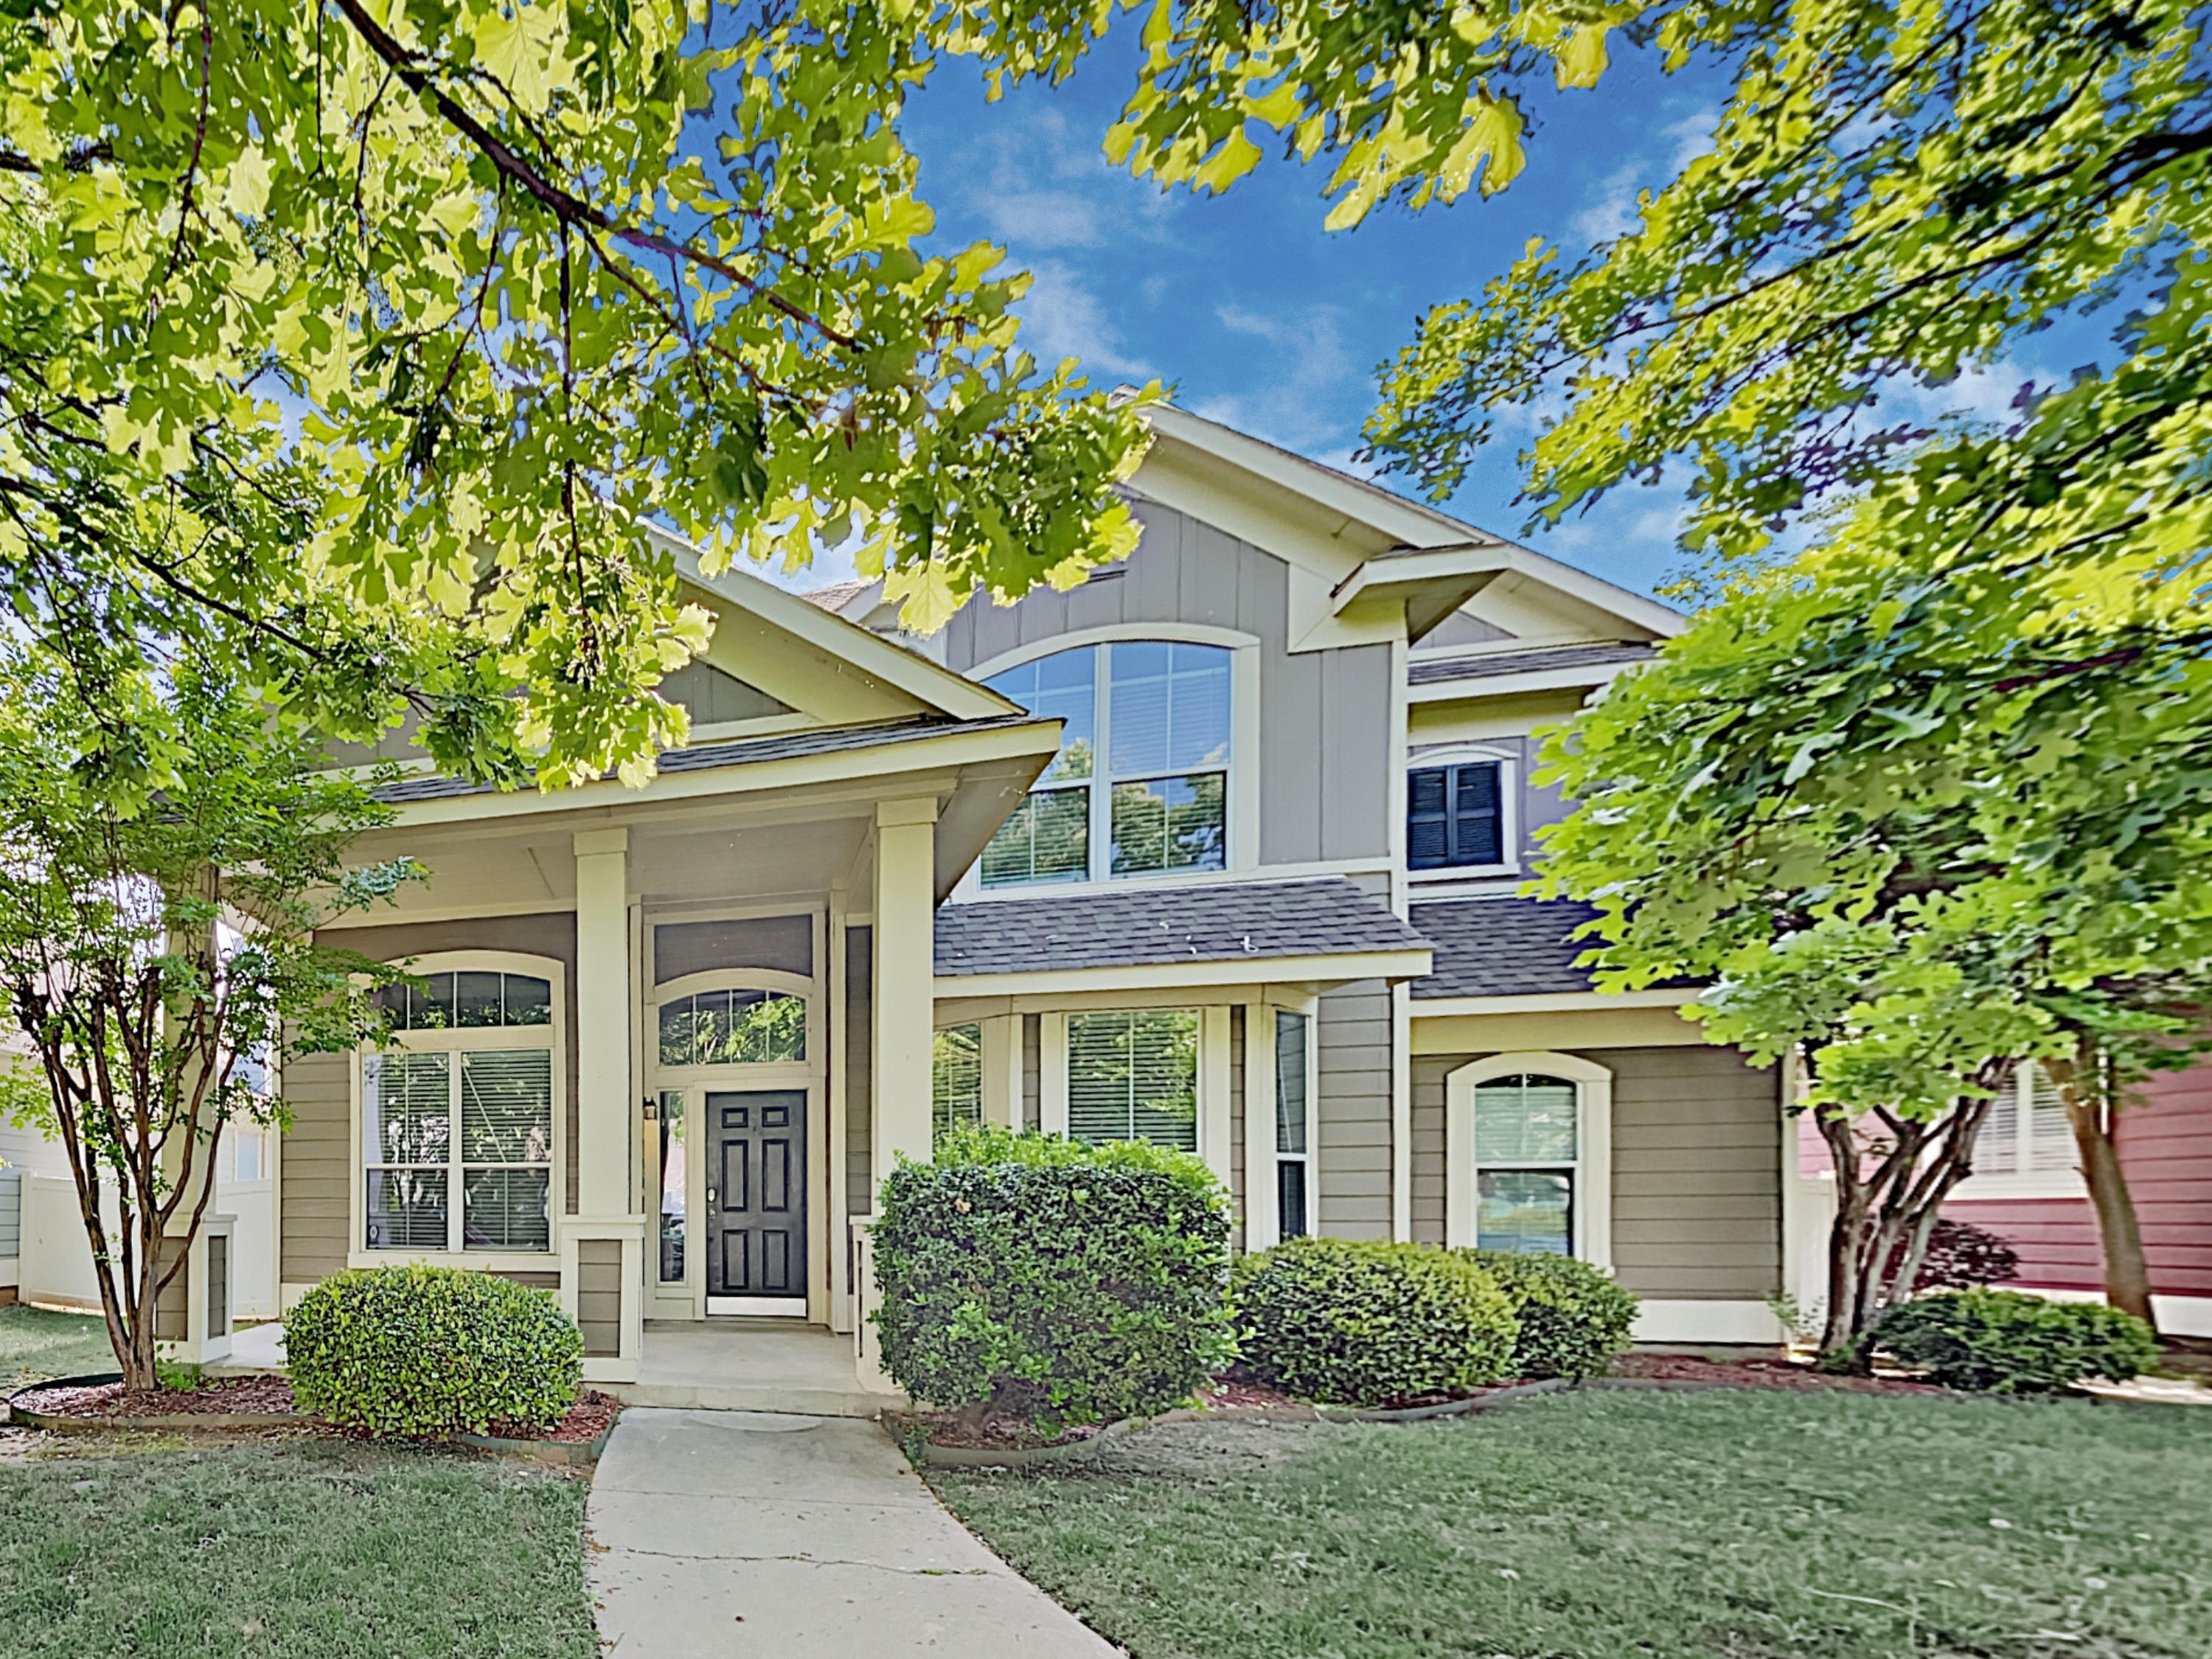 Charming home with a covered patio and beautiful landscaping at Invitation Homes Houston.